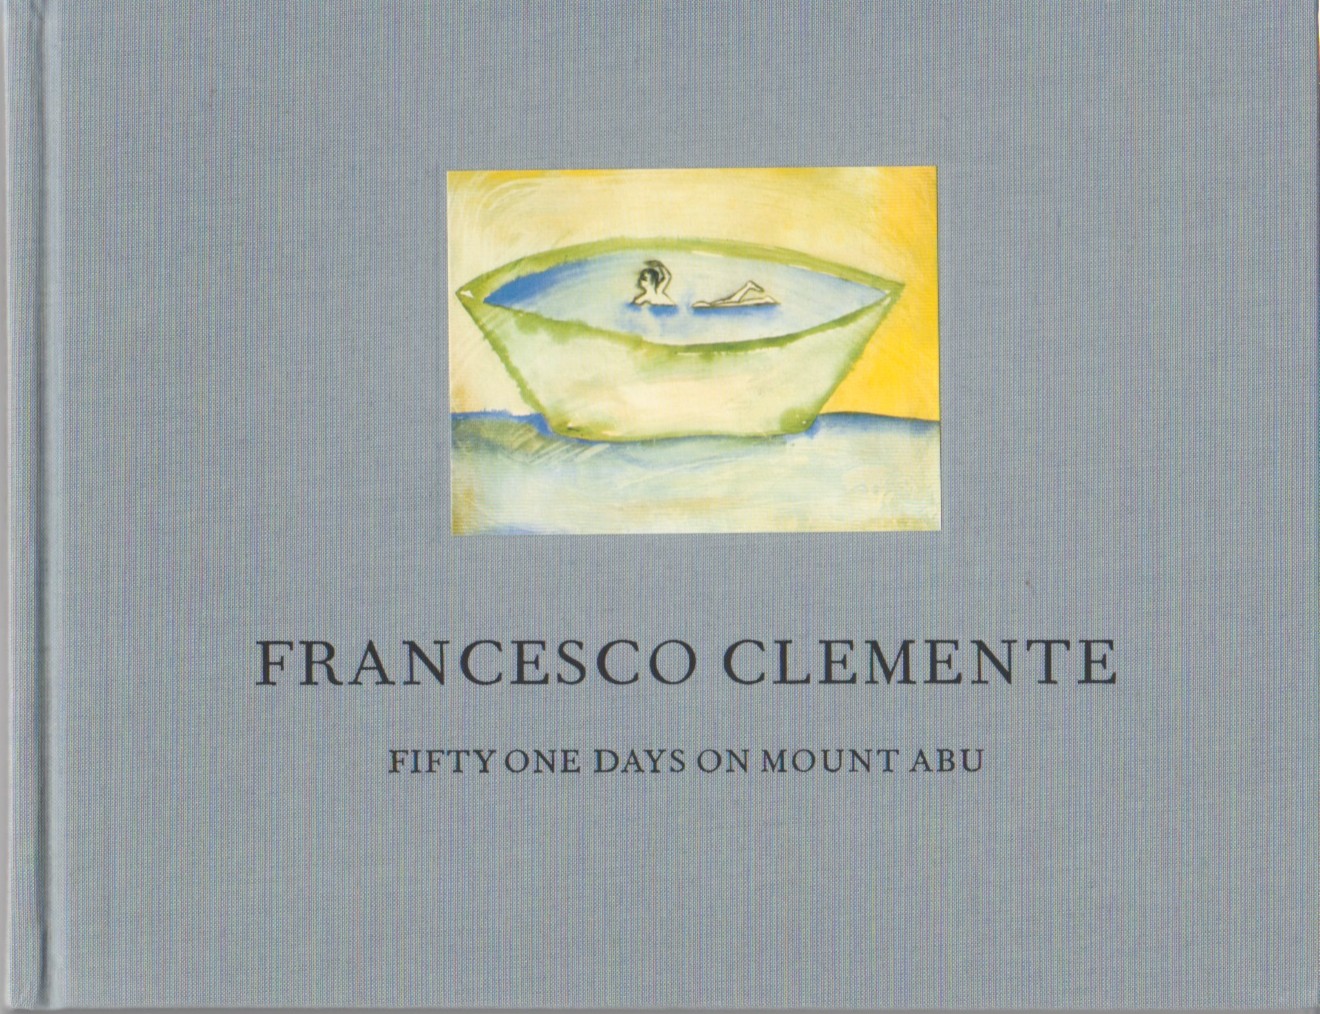 (CLEMENTE, FRANCESCO). Clemente, Francesco - FRANCESCO CLEMENTE: FIFTY ONE DAYS ON MOUNT ABU - DELUXE SLIPCASED EDITION WITH A SIGNED LITHOGRAPH